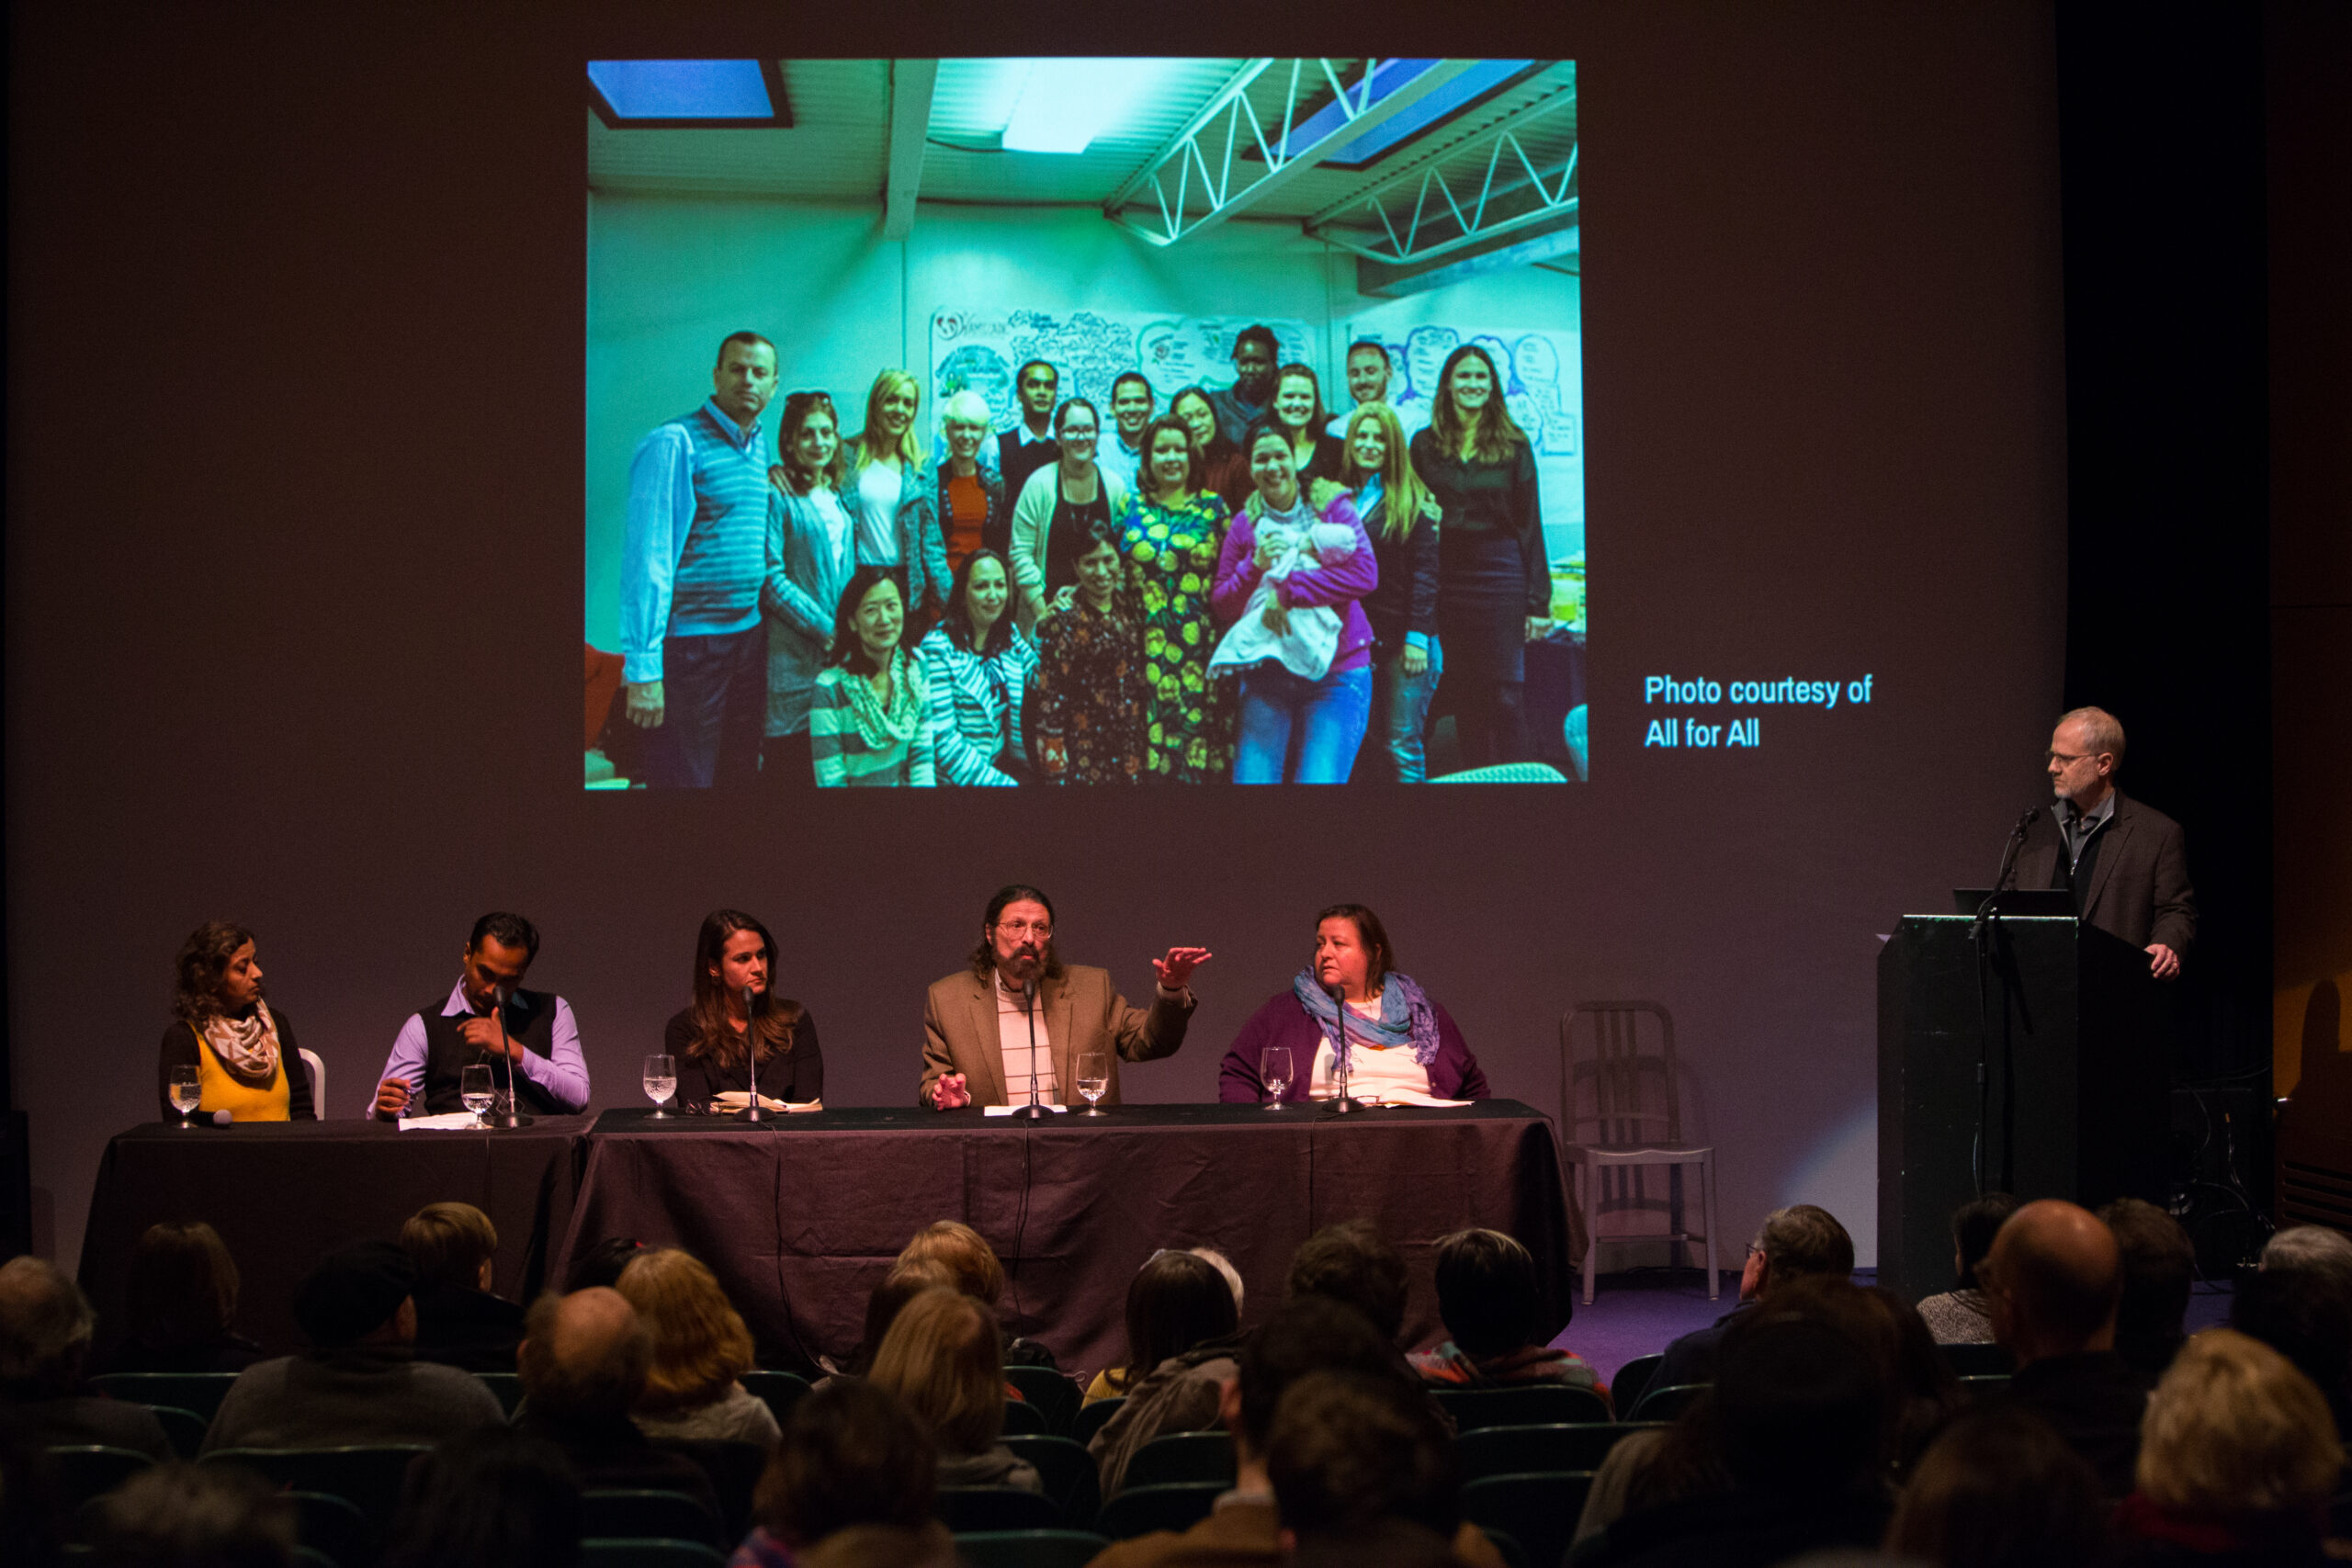 Five panelists sit at a table on the left side of a stage, and one man stands behind a lectern on the right side. One man at the table is talking and gesticulating, as the others look on. Behind them is projected a photo of a group of people posing for the camera. To the side of the image is the text Photo courtesy of All for All